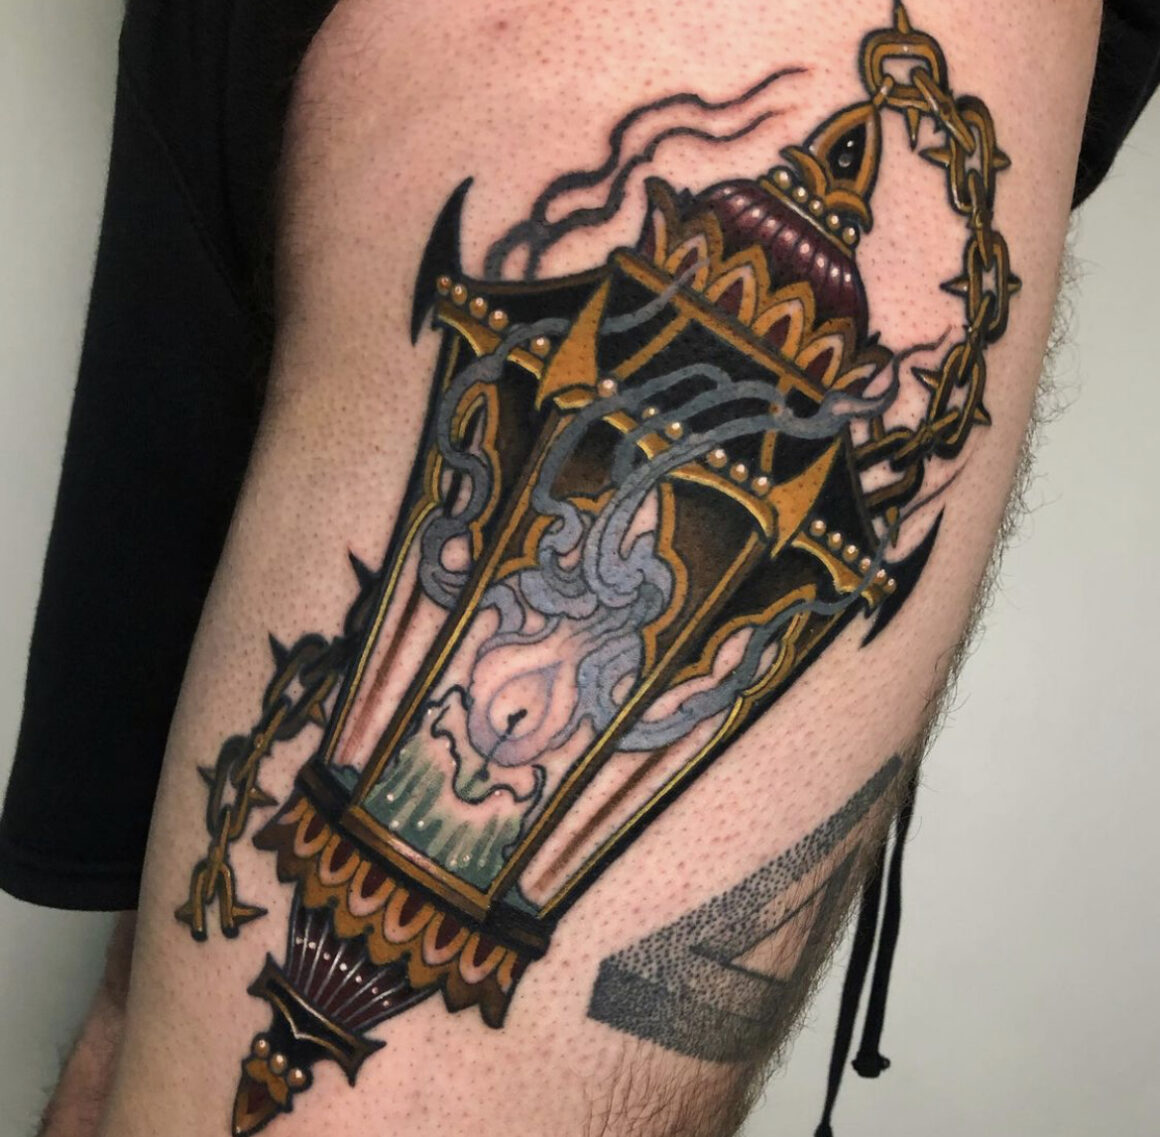 Tattoo Time-lapse of a Lantern by Isaac Aguila - Bearcat Tattoo